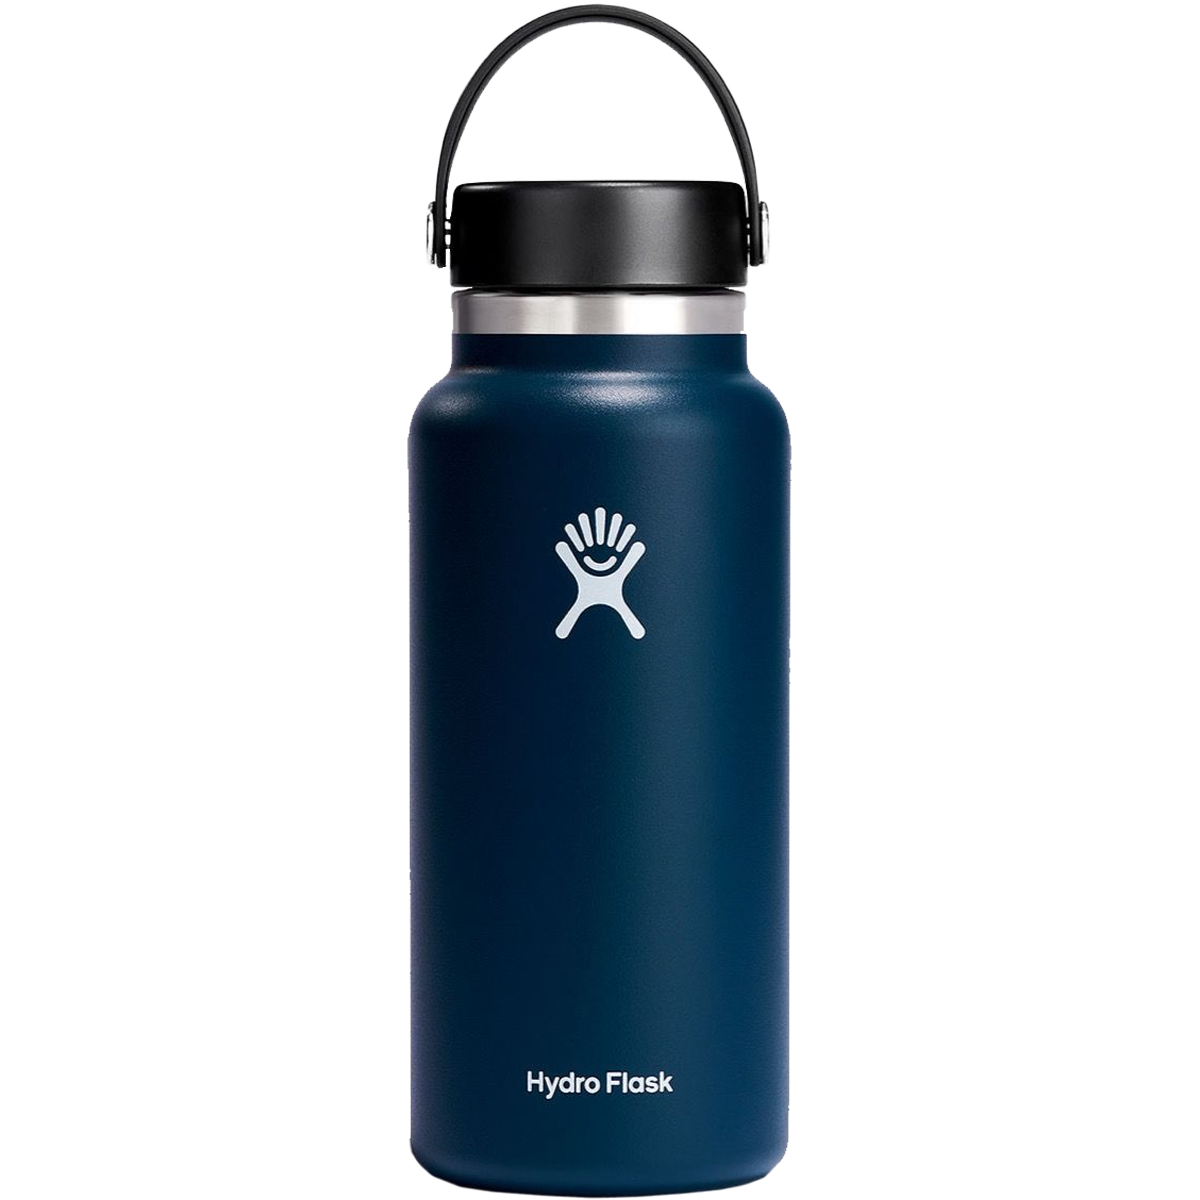  Thermos 32 Ounce Foam Insulated Hydration Bottle, Blue : Sports  & Outdoors